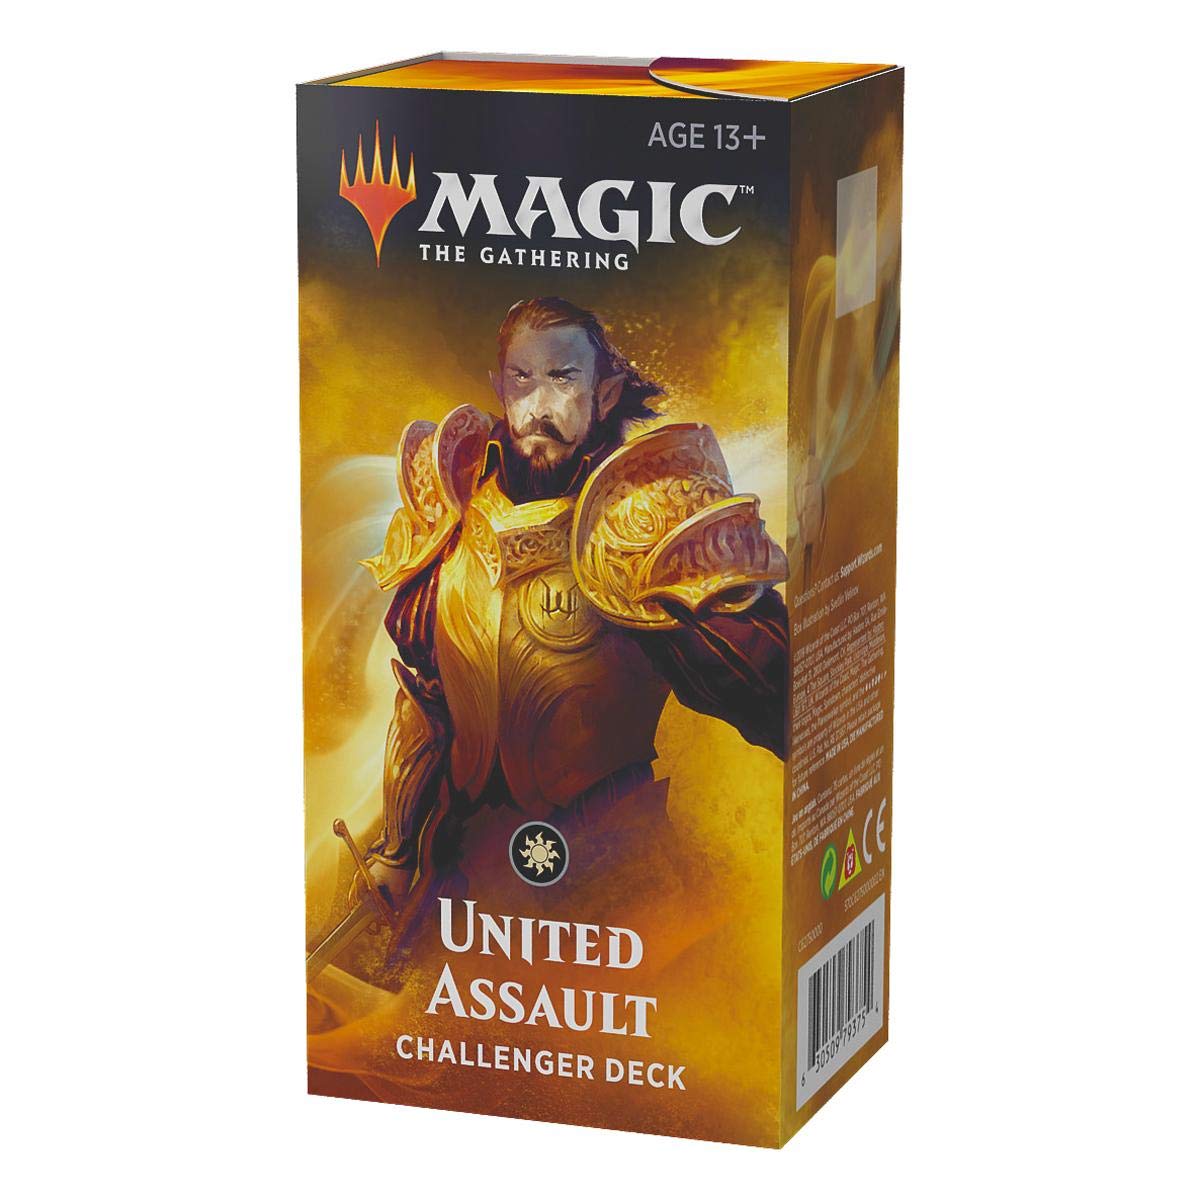 Copy of Copy of Magic The Gathering Challenger Deck 2019 - United Assault